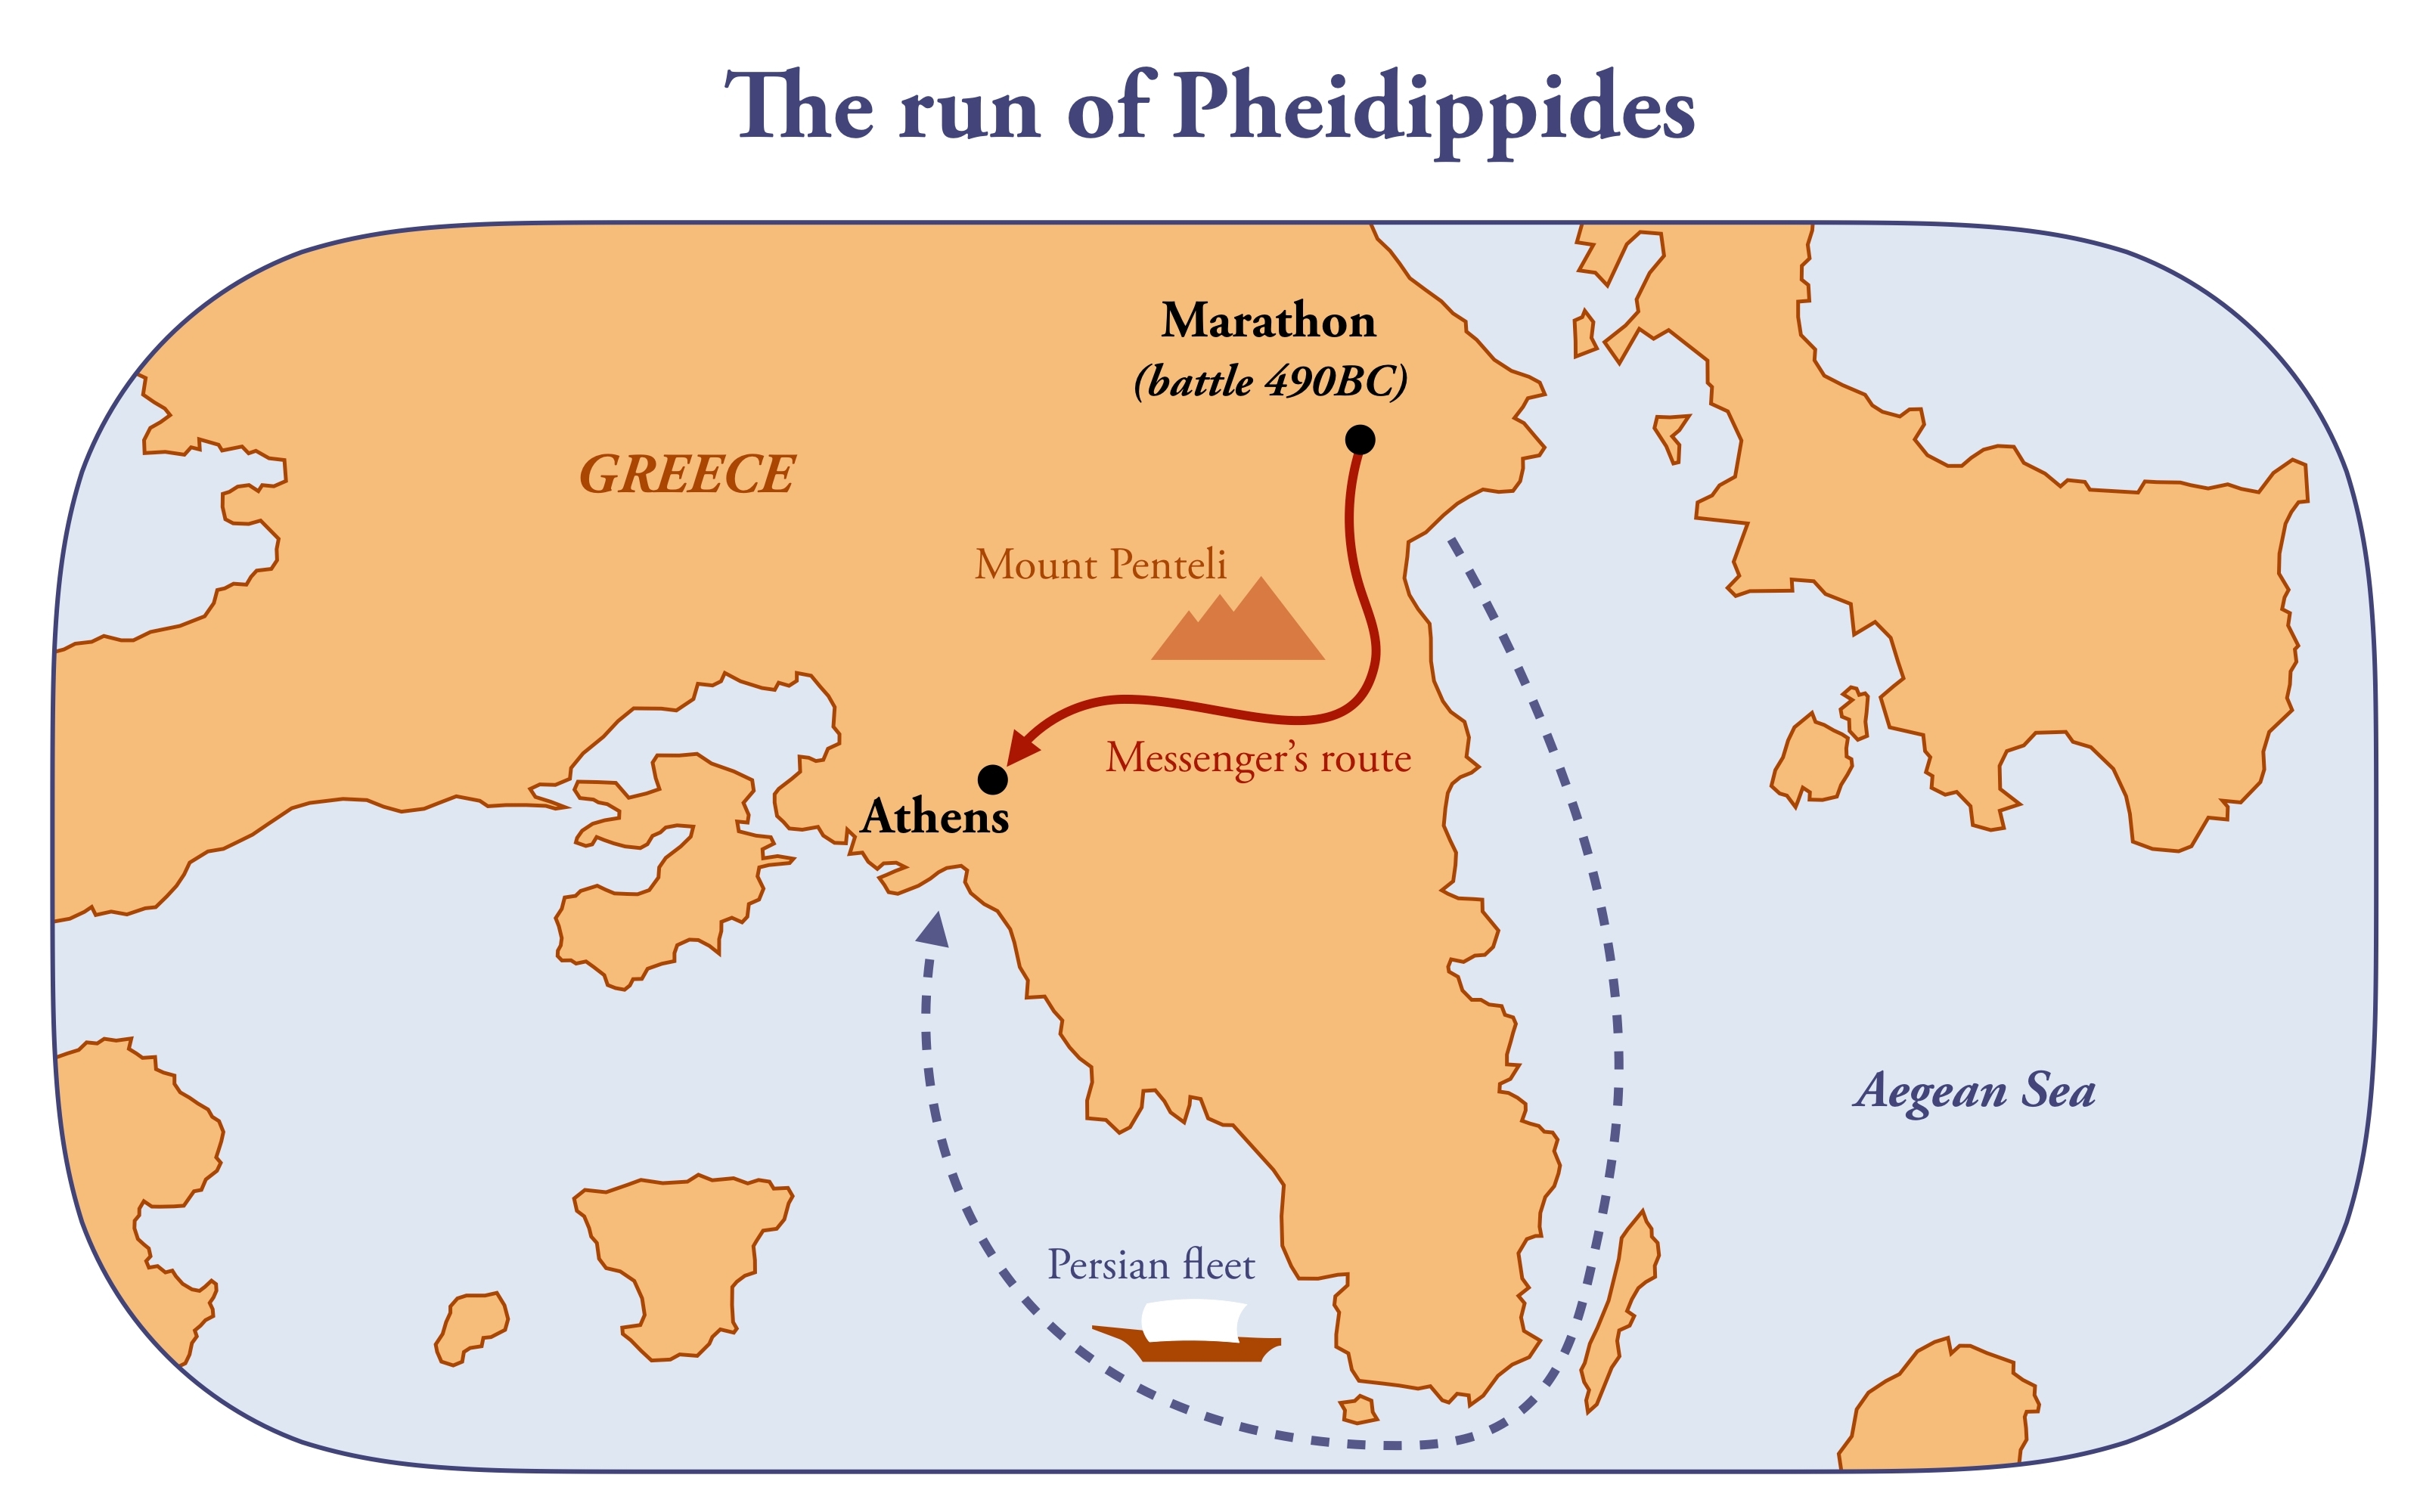 A map showing the route ran by Pheidippides, the Greek myth that modern Marathons are named after